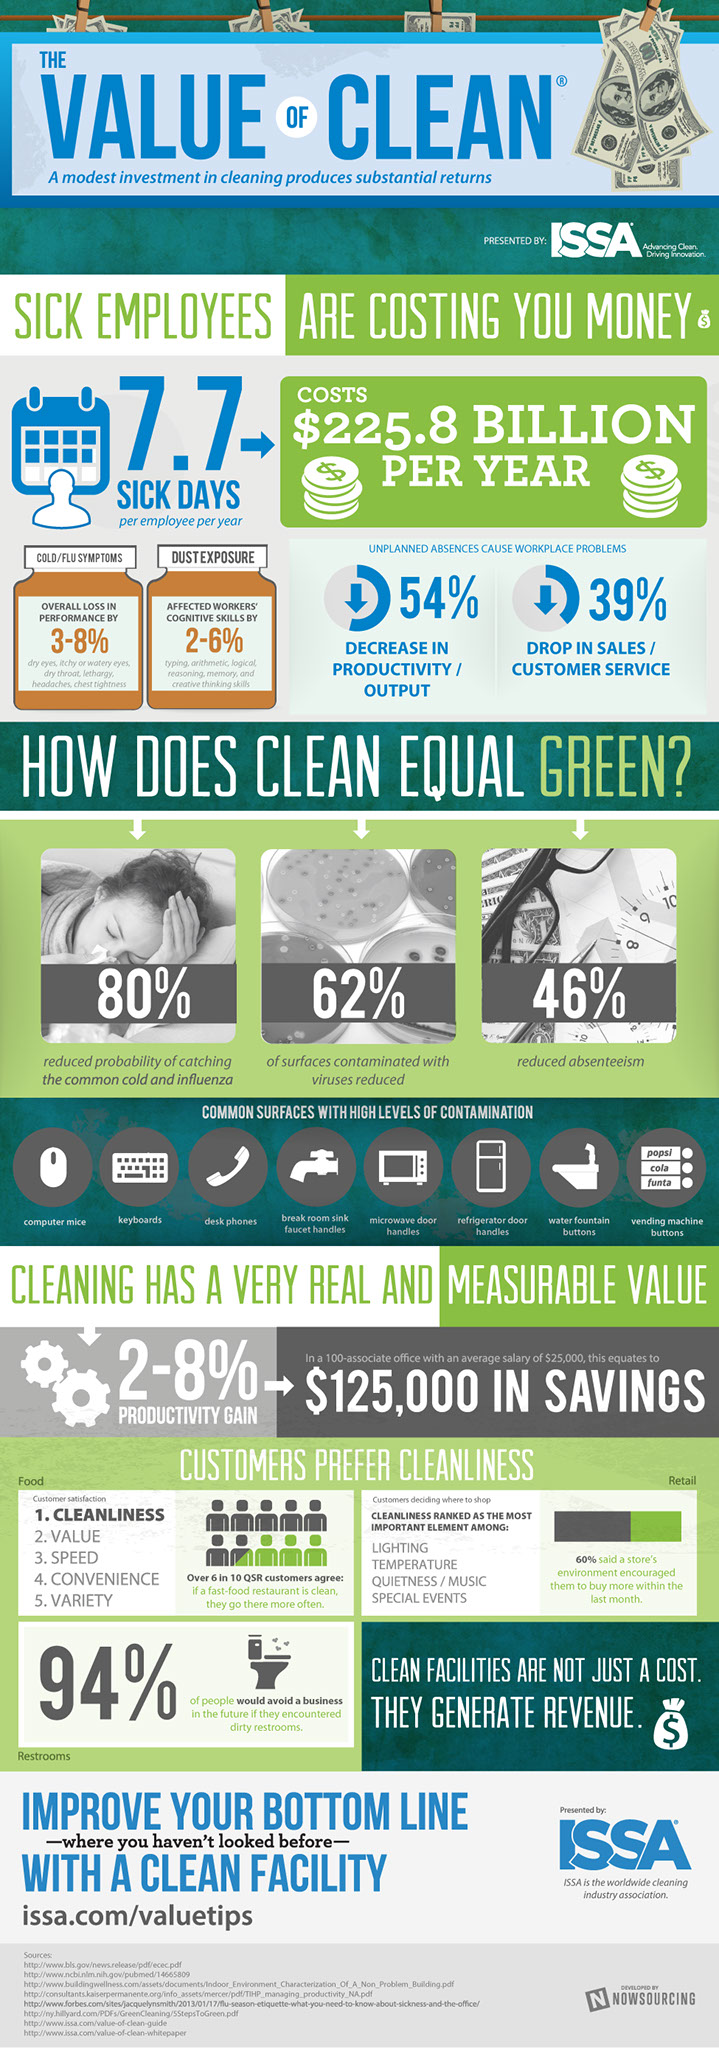 The Value Of Clean. Infographic showingthat a small investment in cleaning can yield large returns!